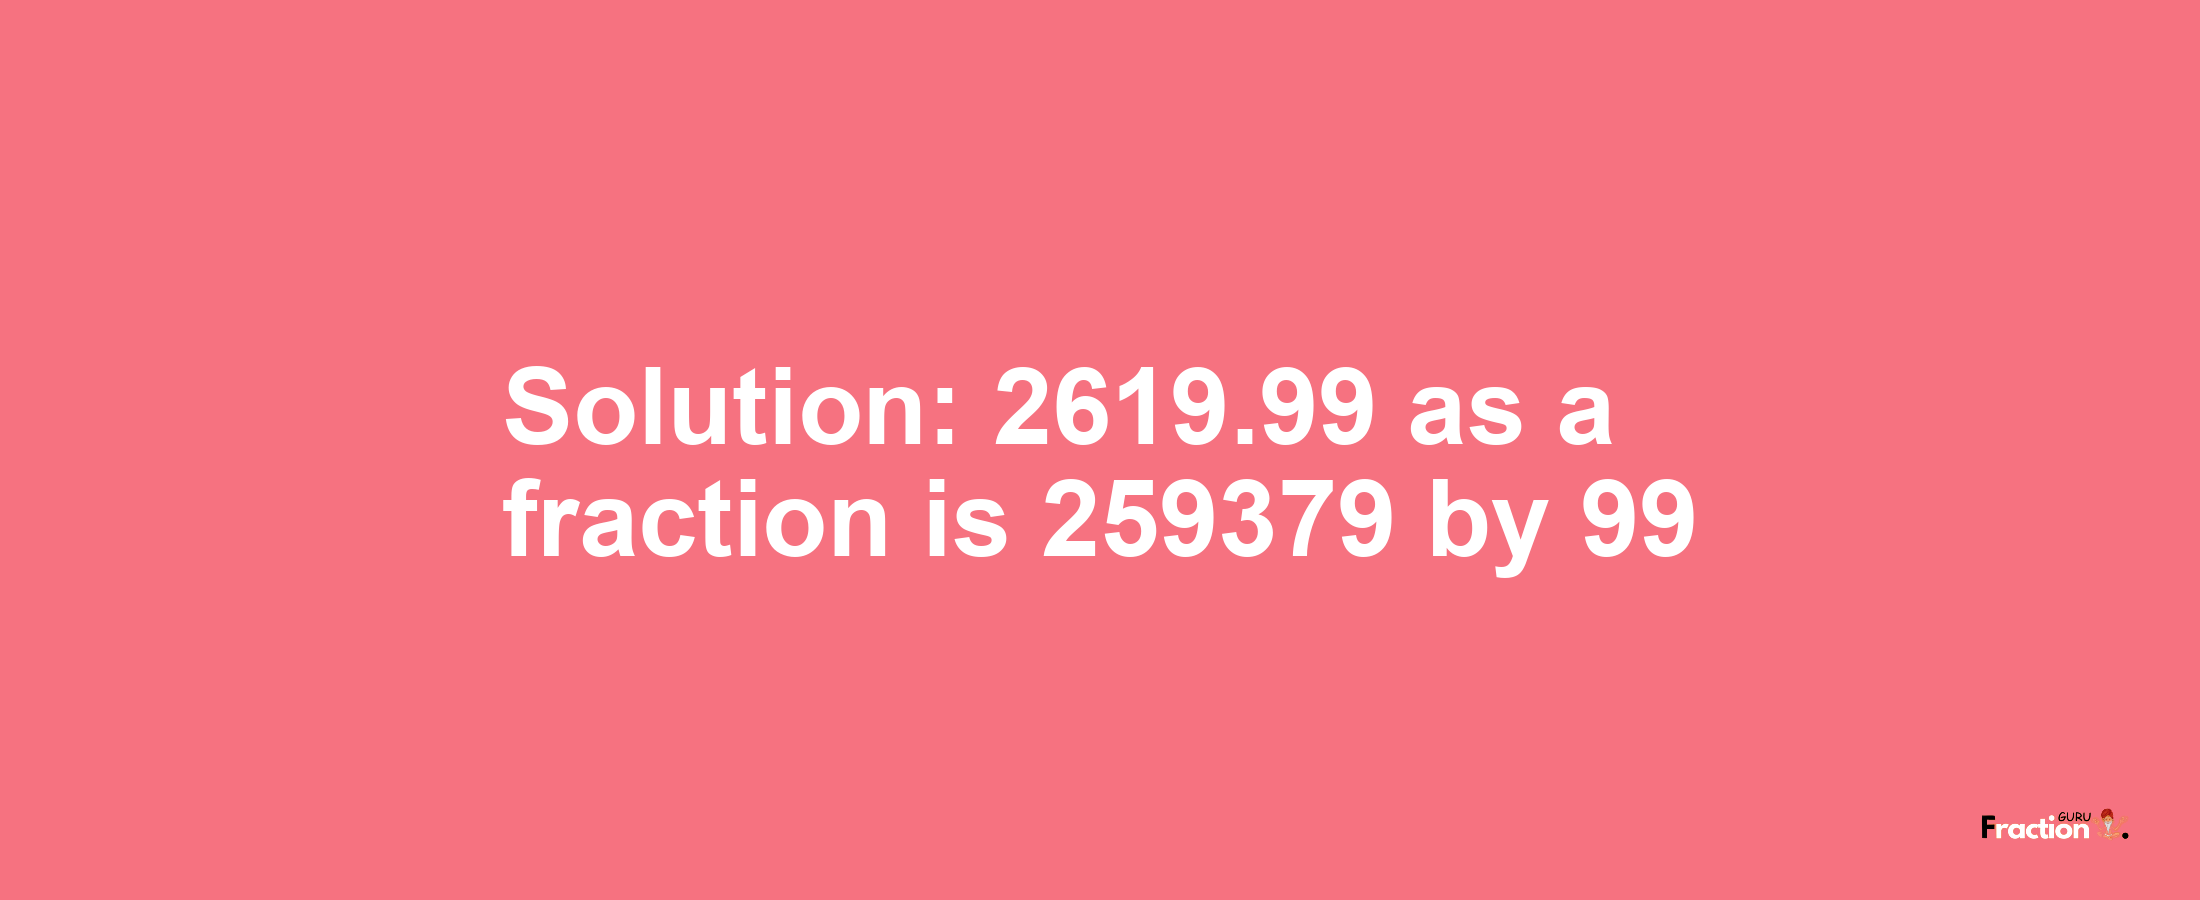 Solution:2619.99 as a fraction is 259379/99